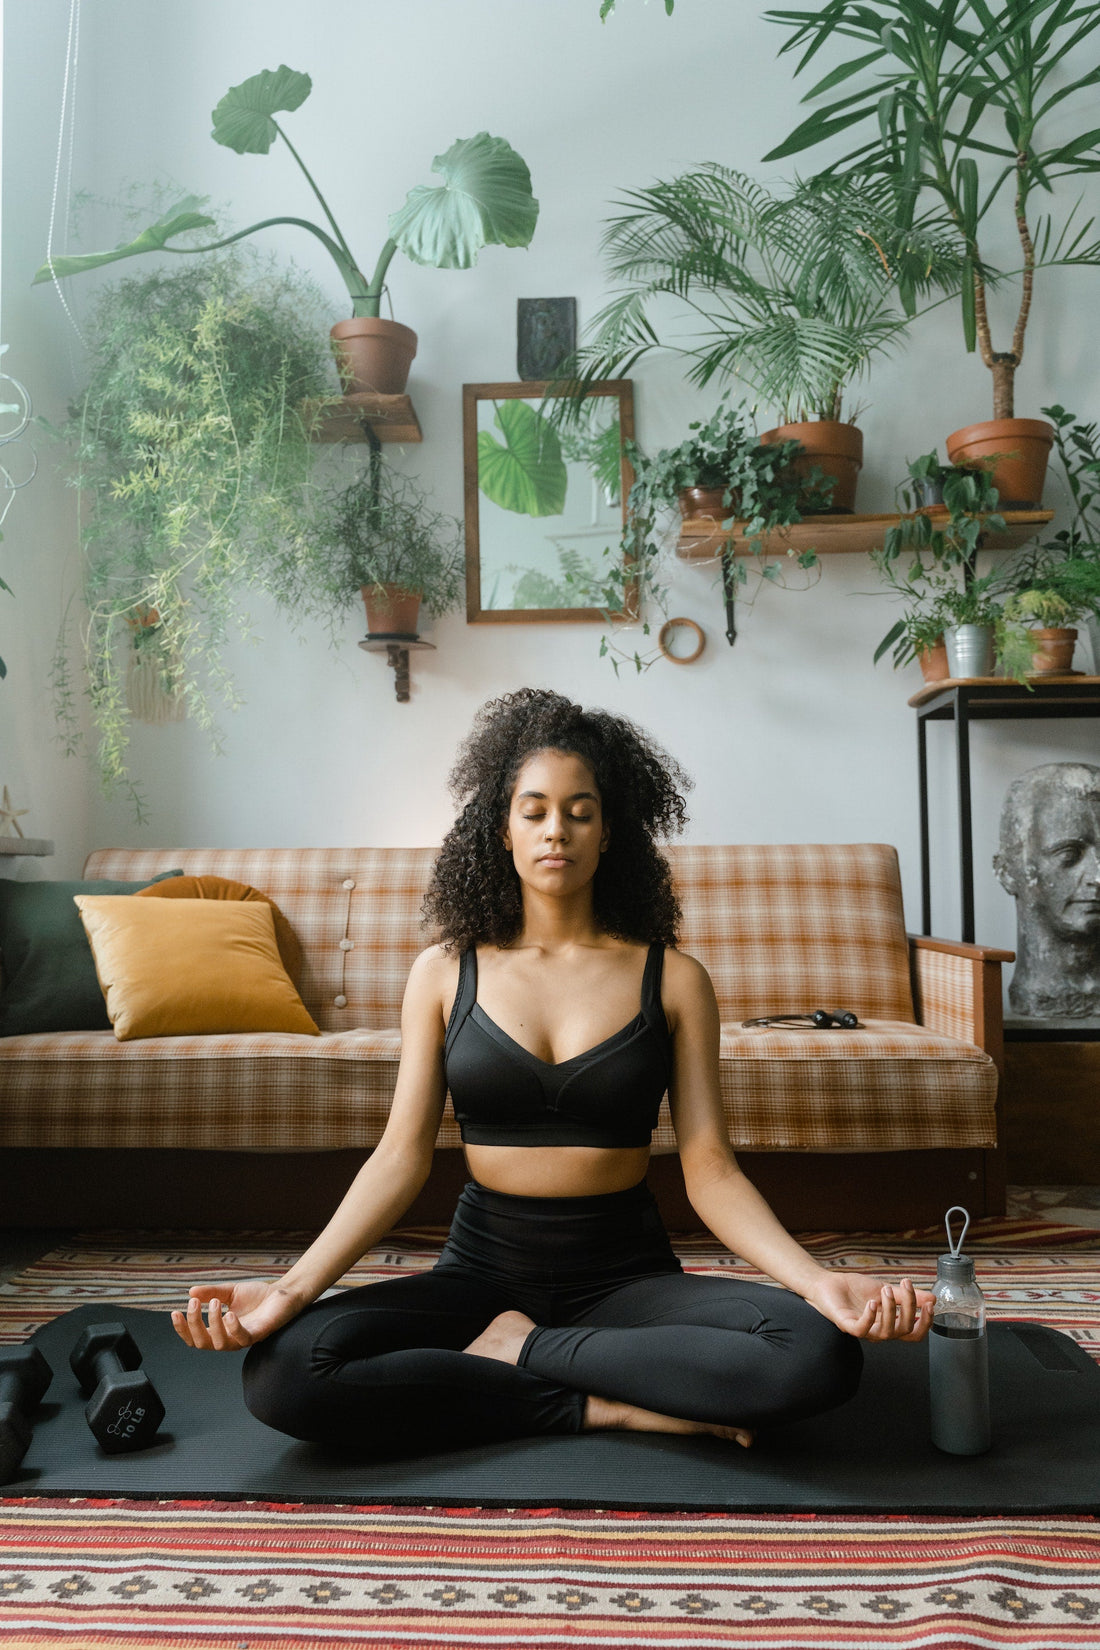 Find Inner Peace and Relieve Stress with This Soothing Yoga Routine - Linions